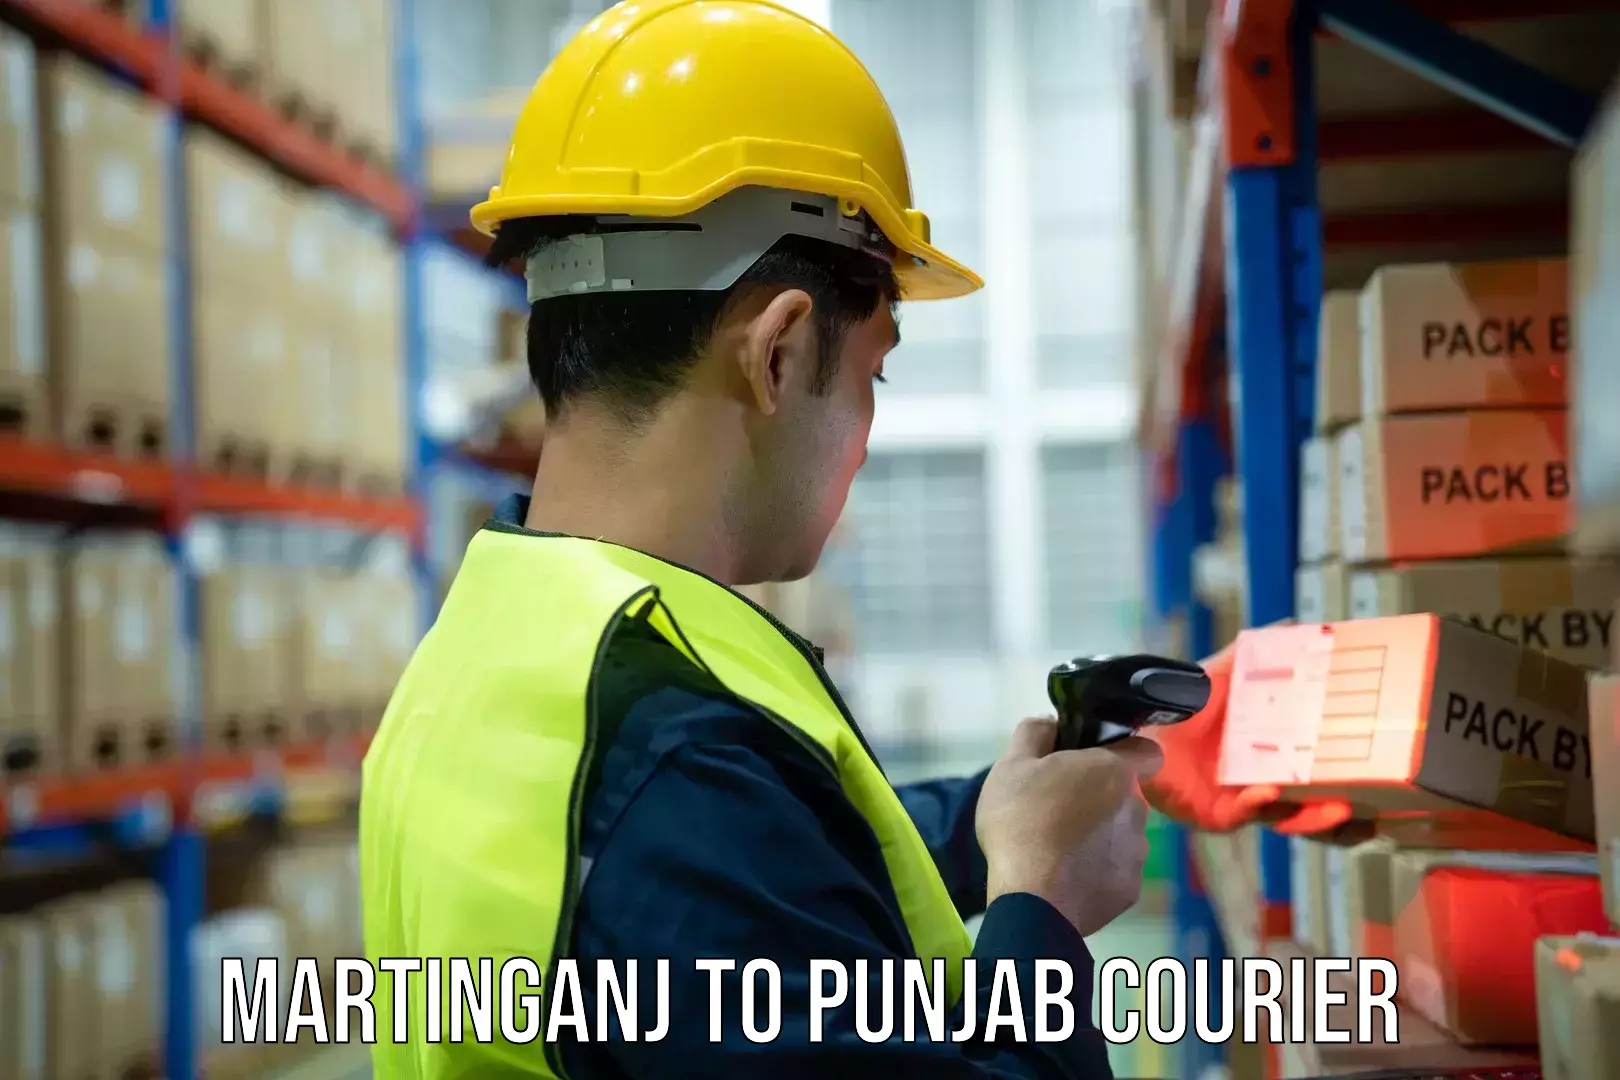 State-of-the-art courier technology Martinganj to Punjab